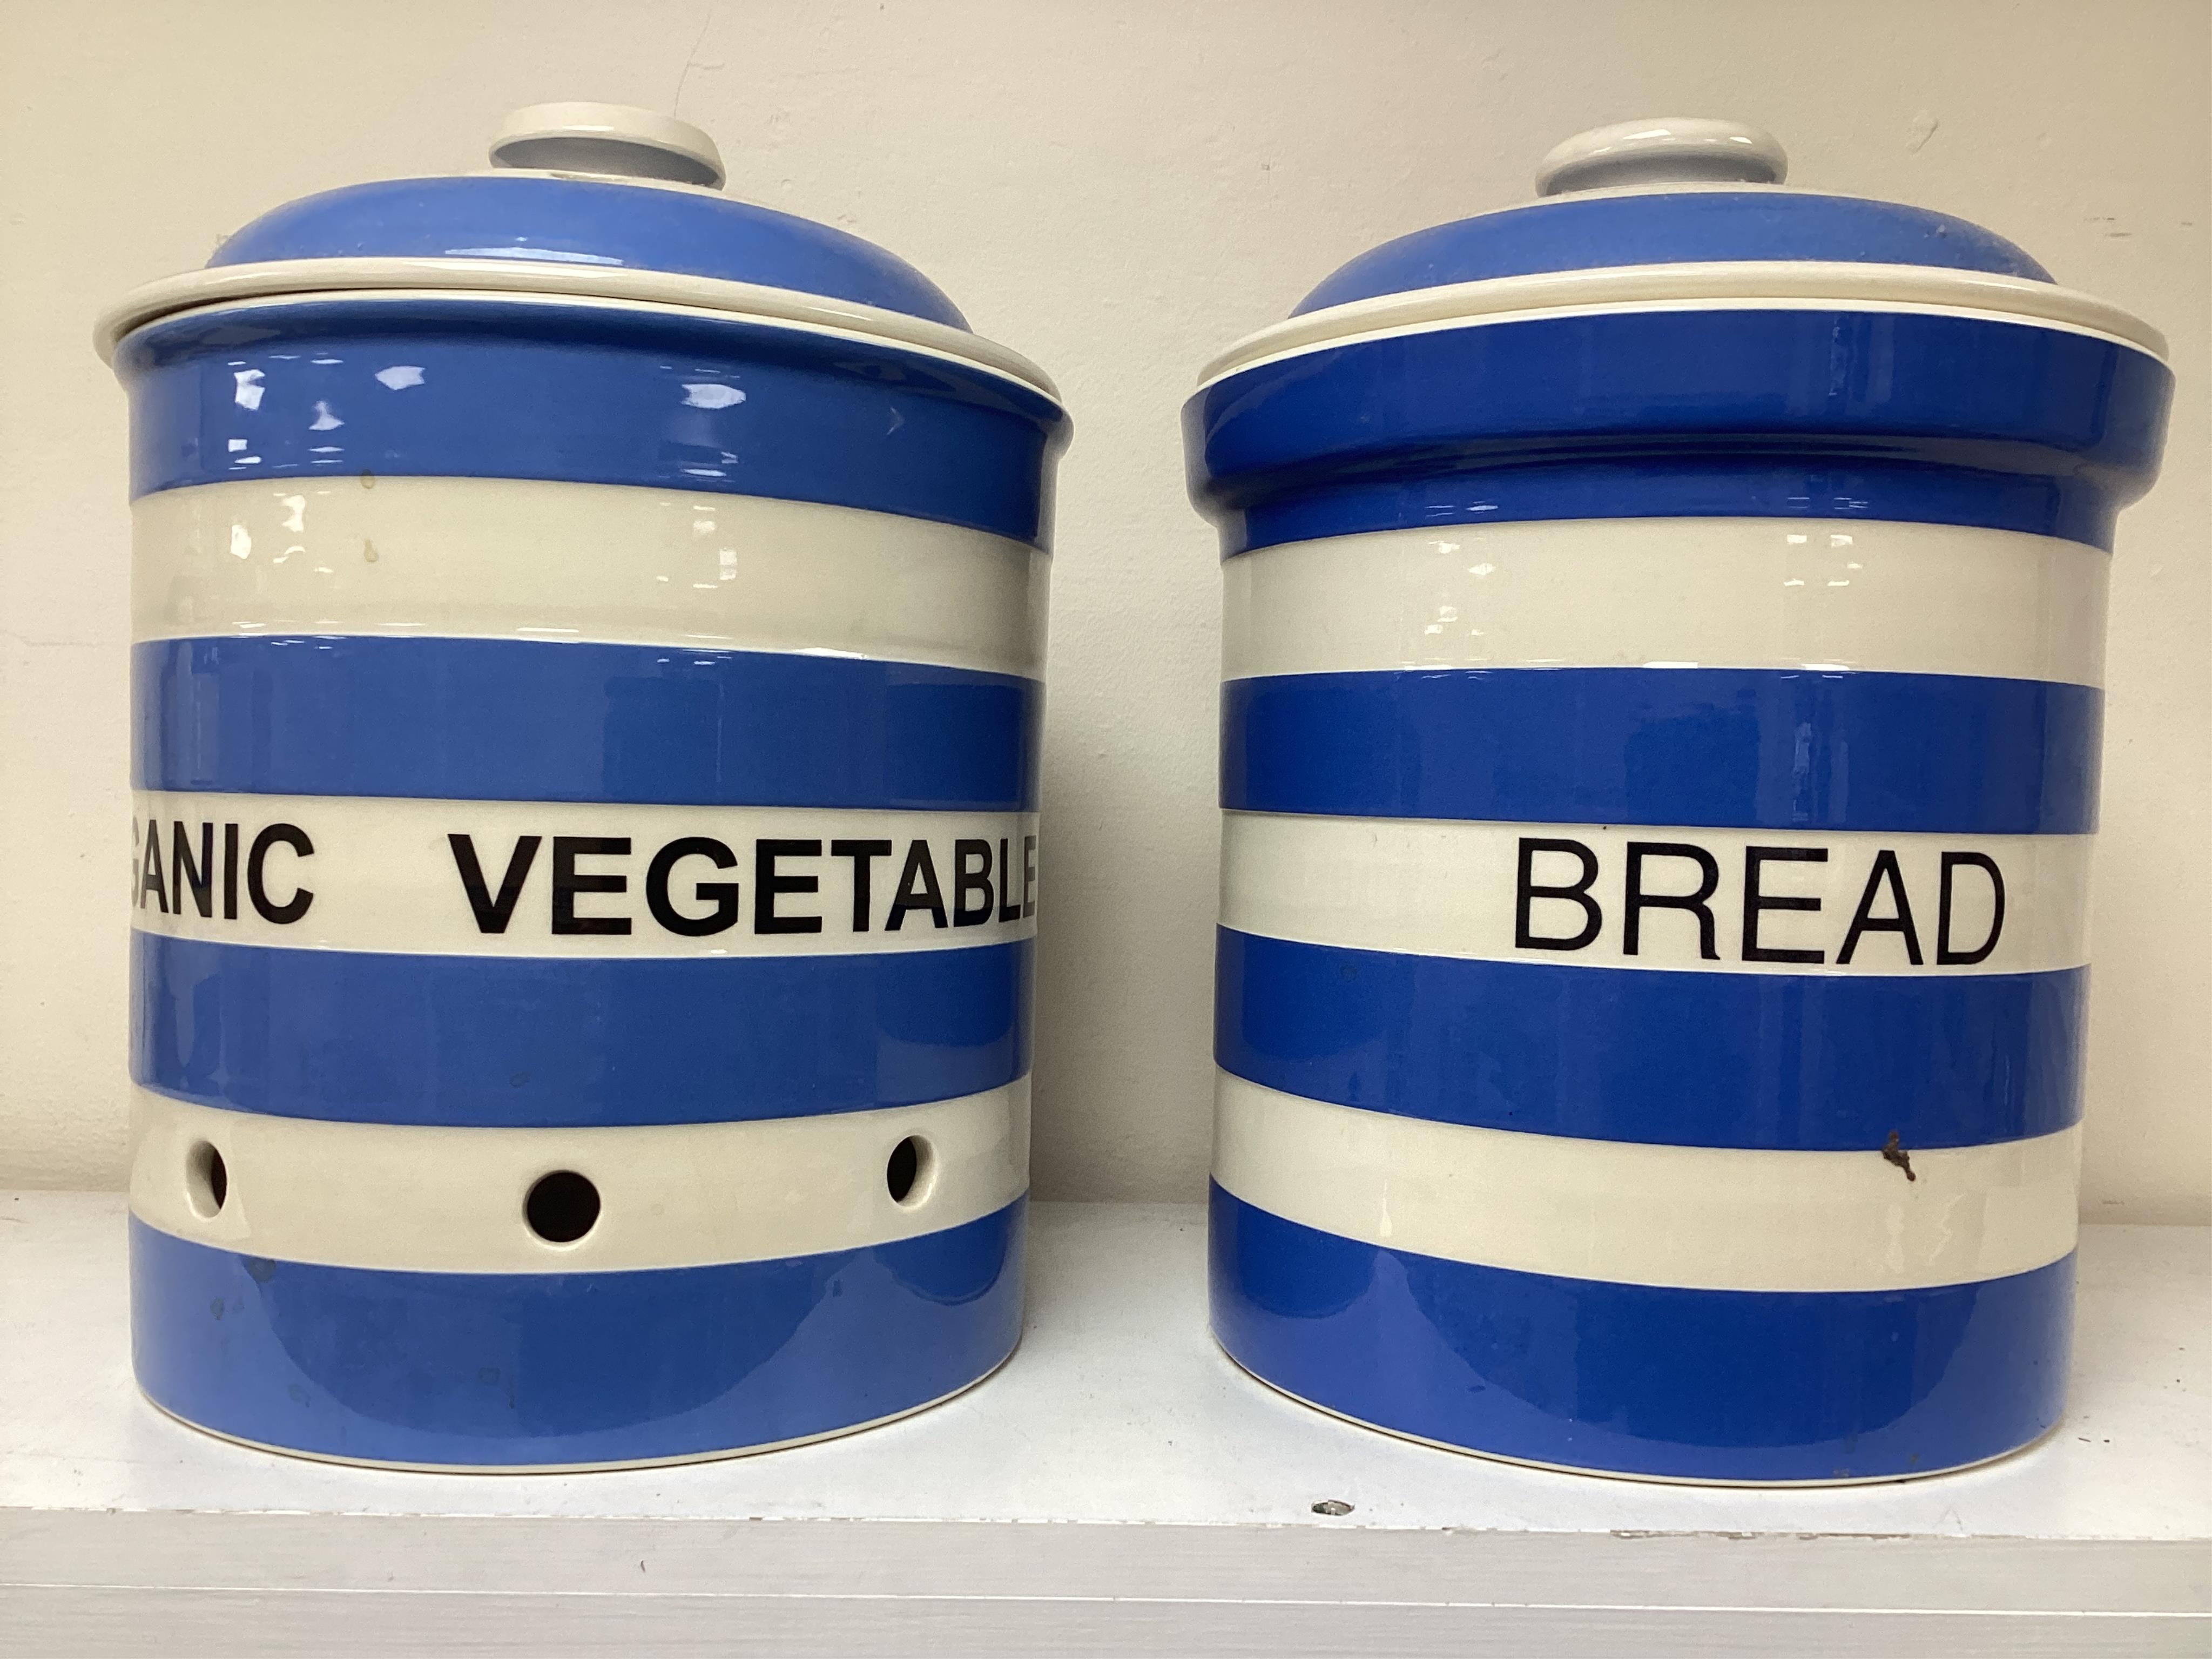 T.G.Green Cornish Kitchenware, two modern lidded containers, Organic Vegetable and Bread, height 31cm. Condition - good